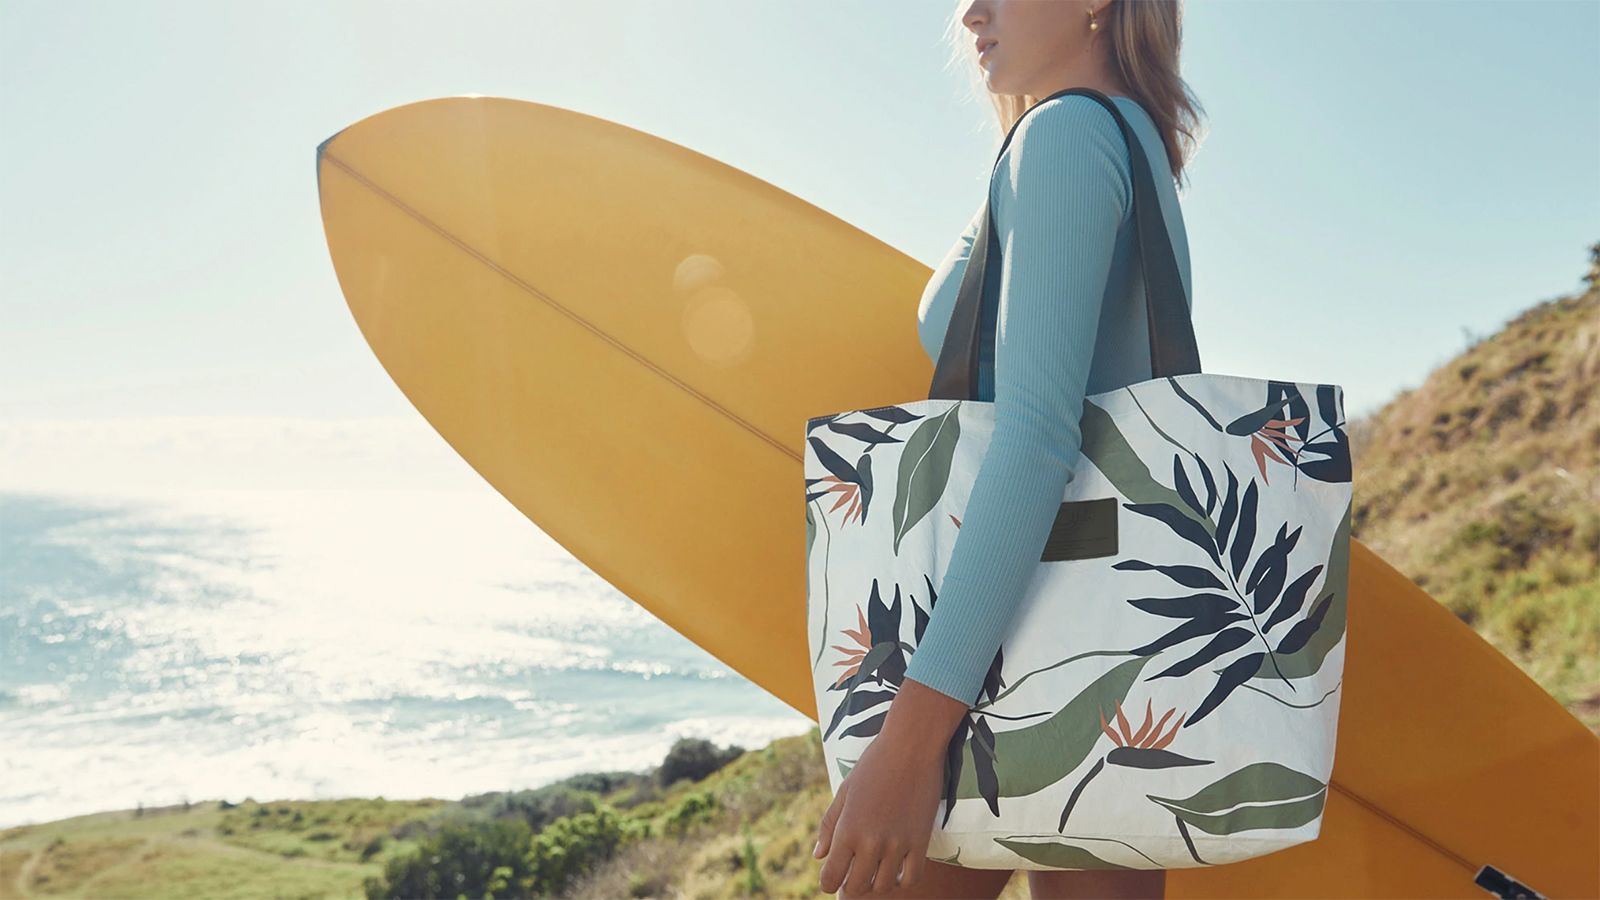 The 20 best beach bags to buy this year, according to experts | CNN Underscored